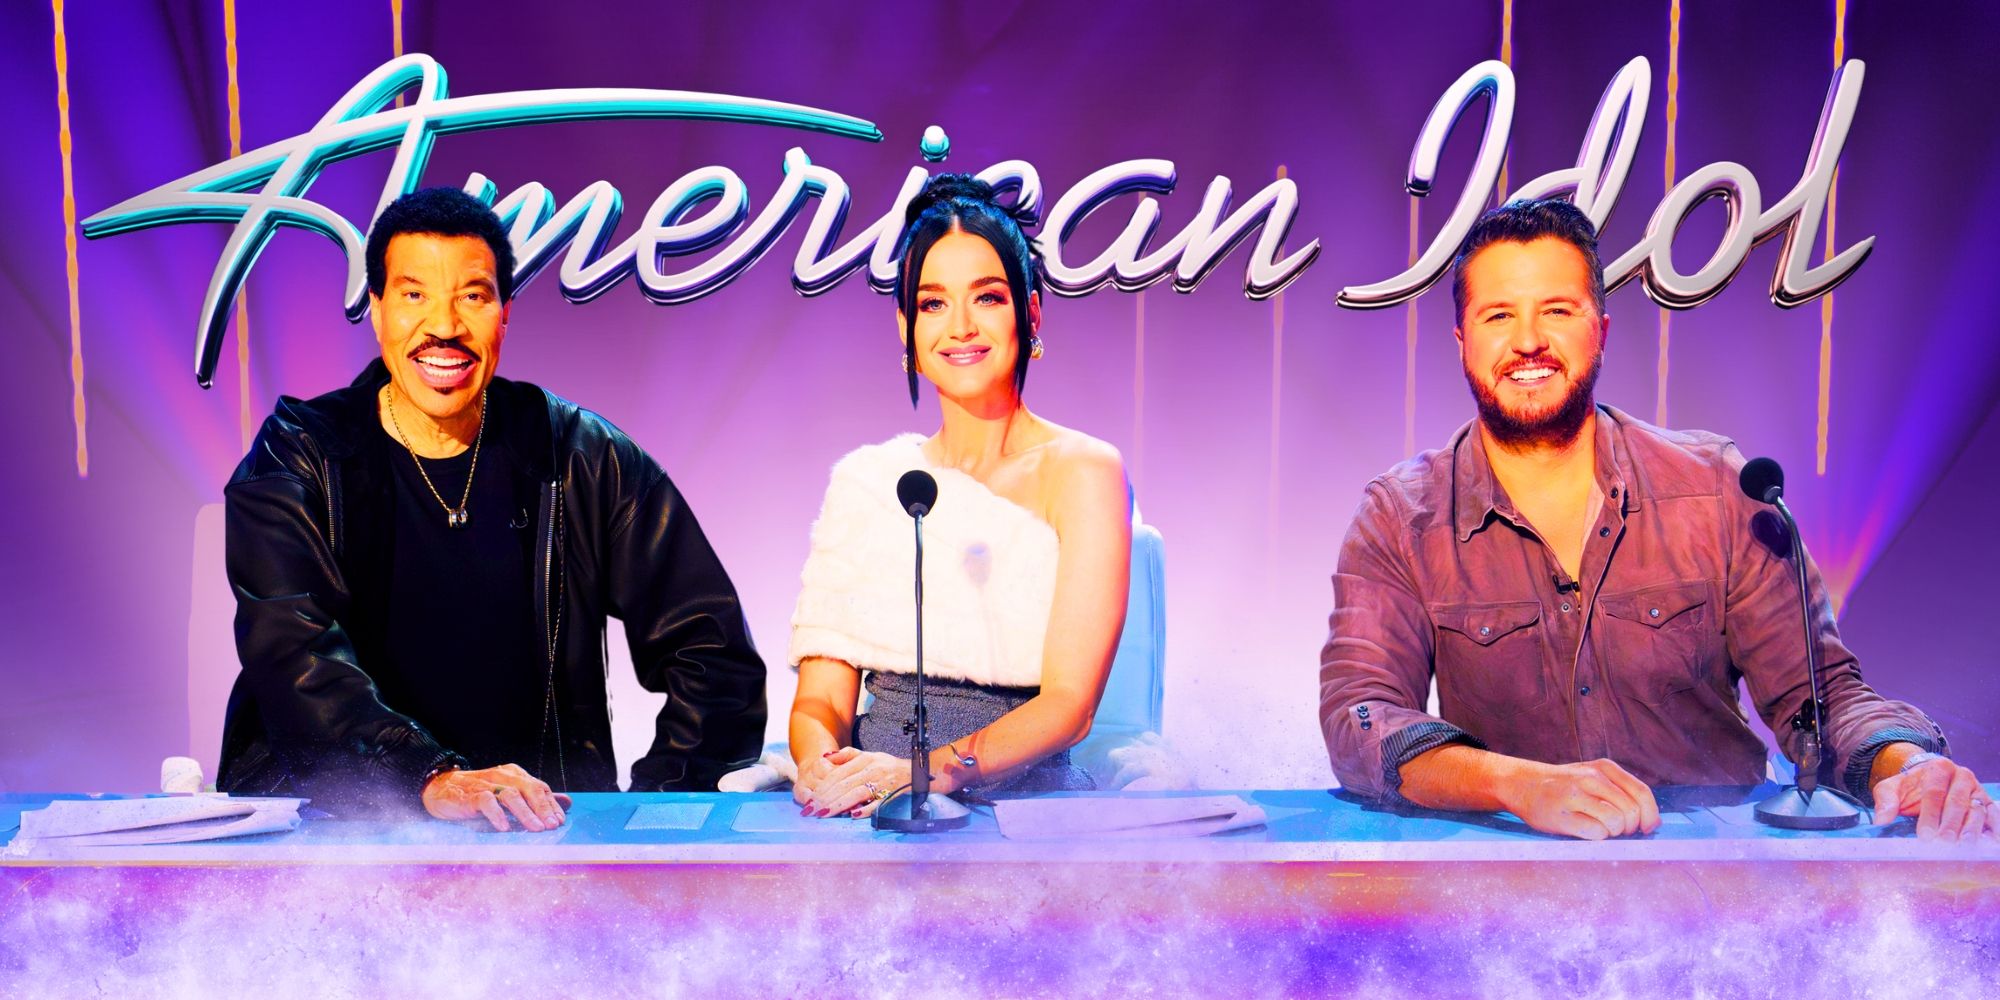 American Idol Judges Lionel Richie Katy Perry and Luke Bryan Sitting at Judges' Table With Purple Background